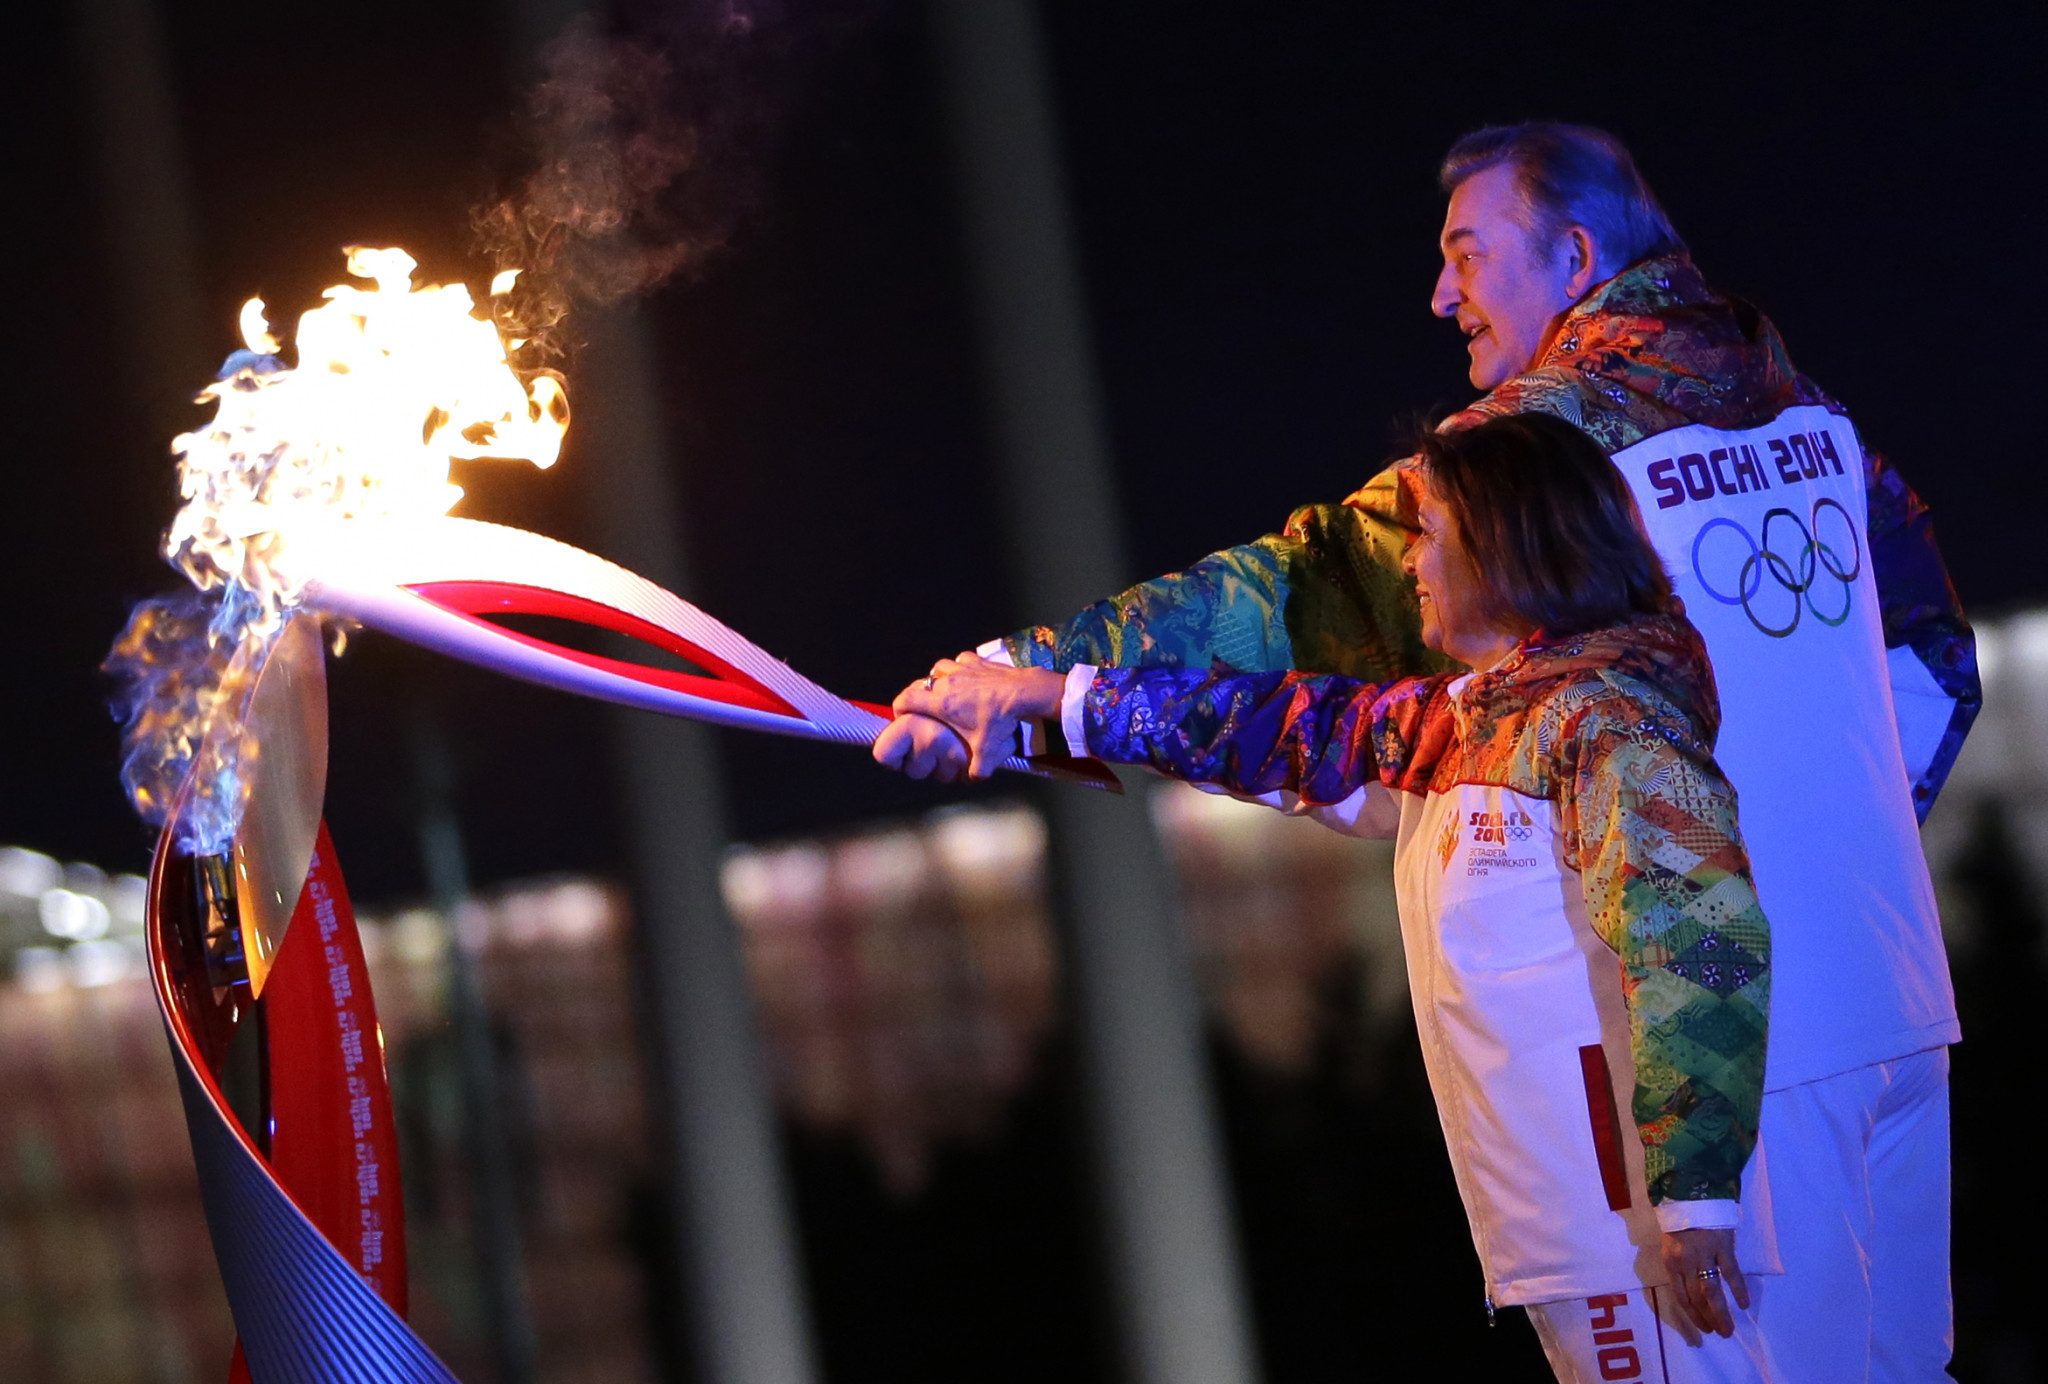 Vladislav Tretiak was chosen to light the Olympic Flame at the Opening Ceremony of Sochi 2014 ©Getty Images